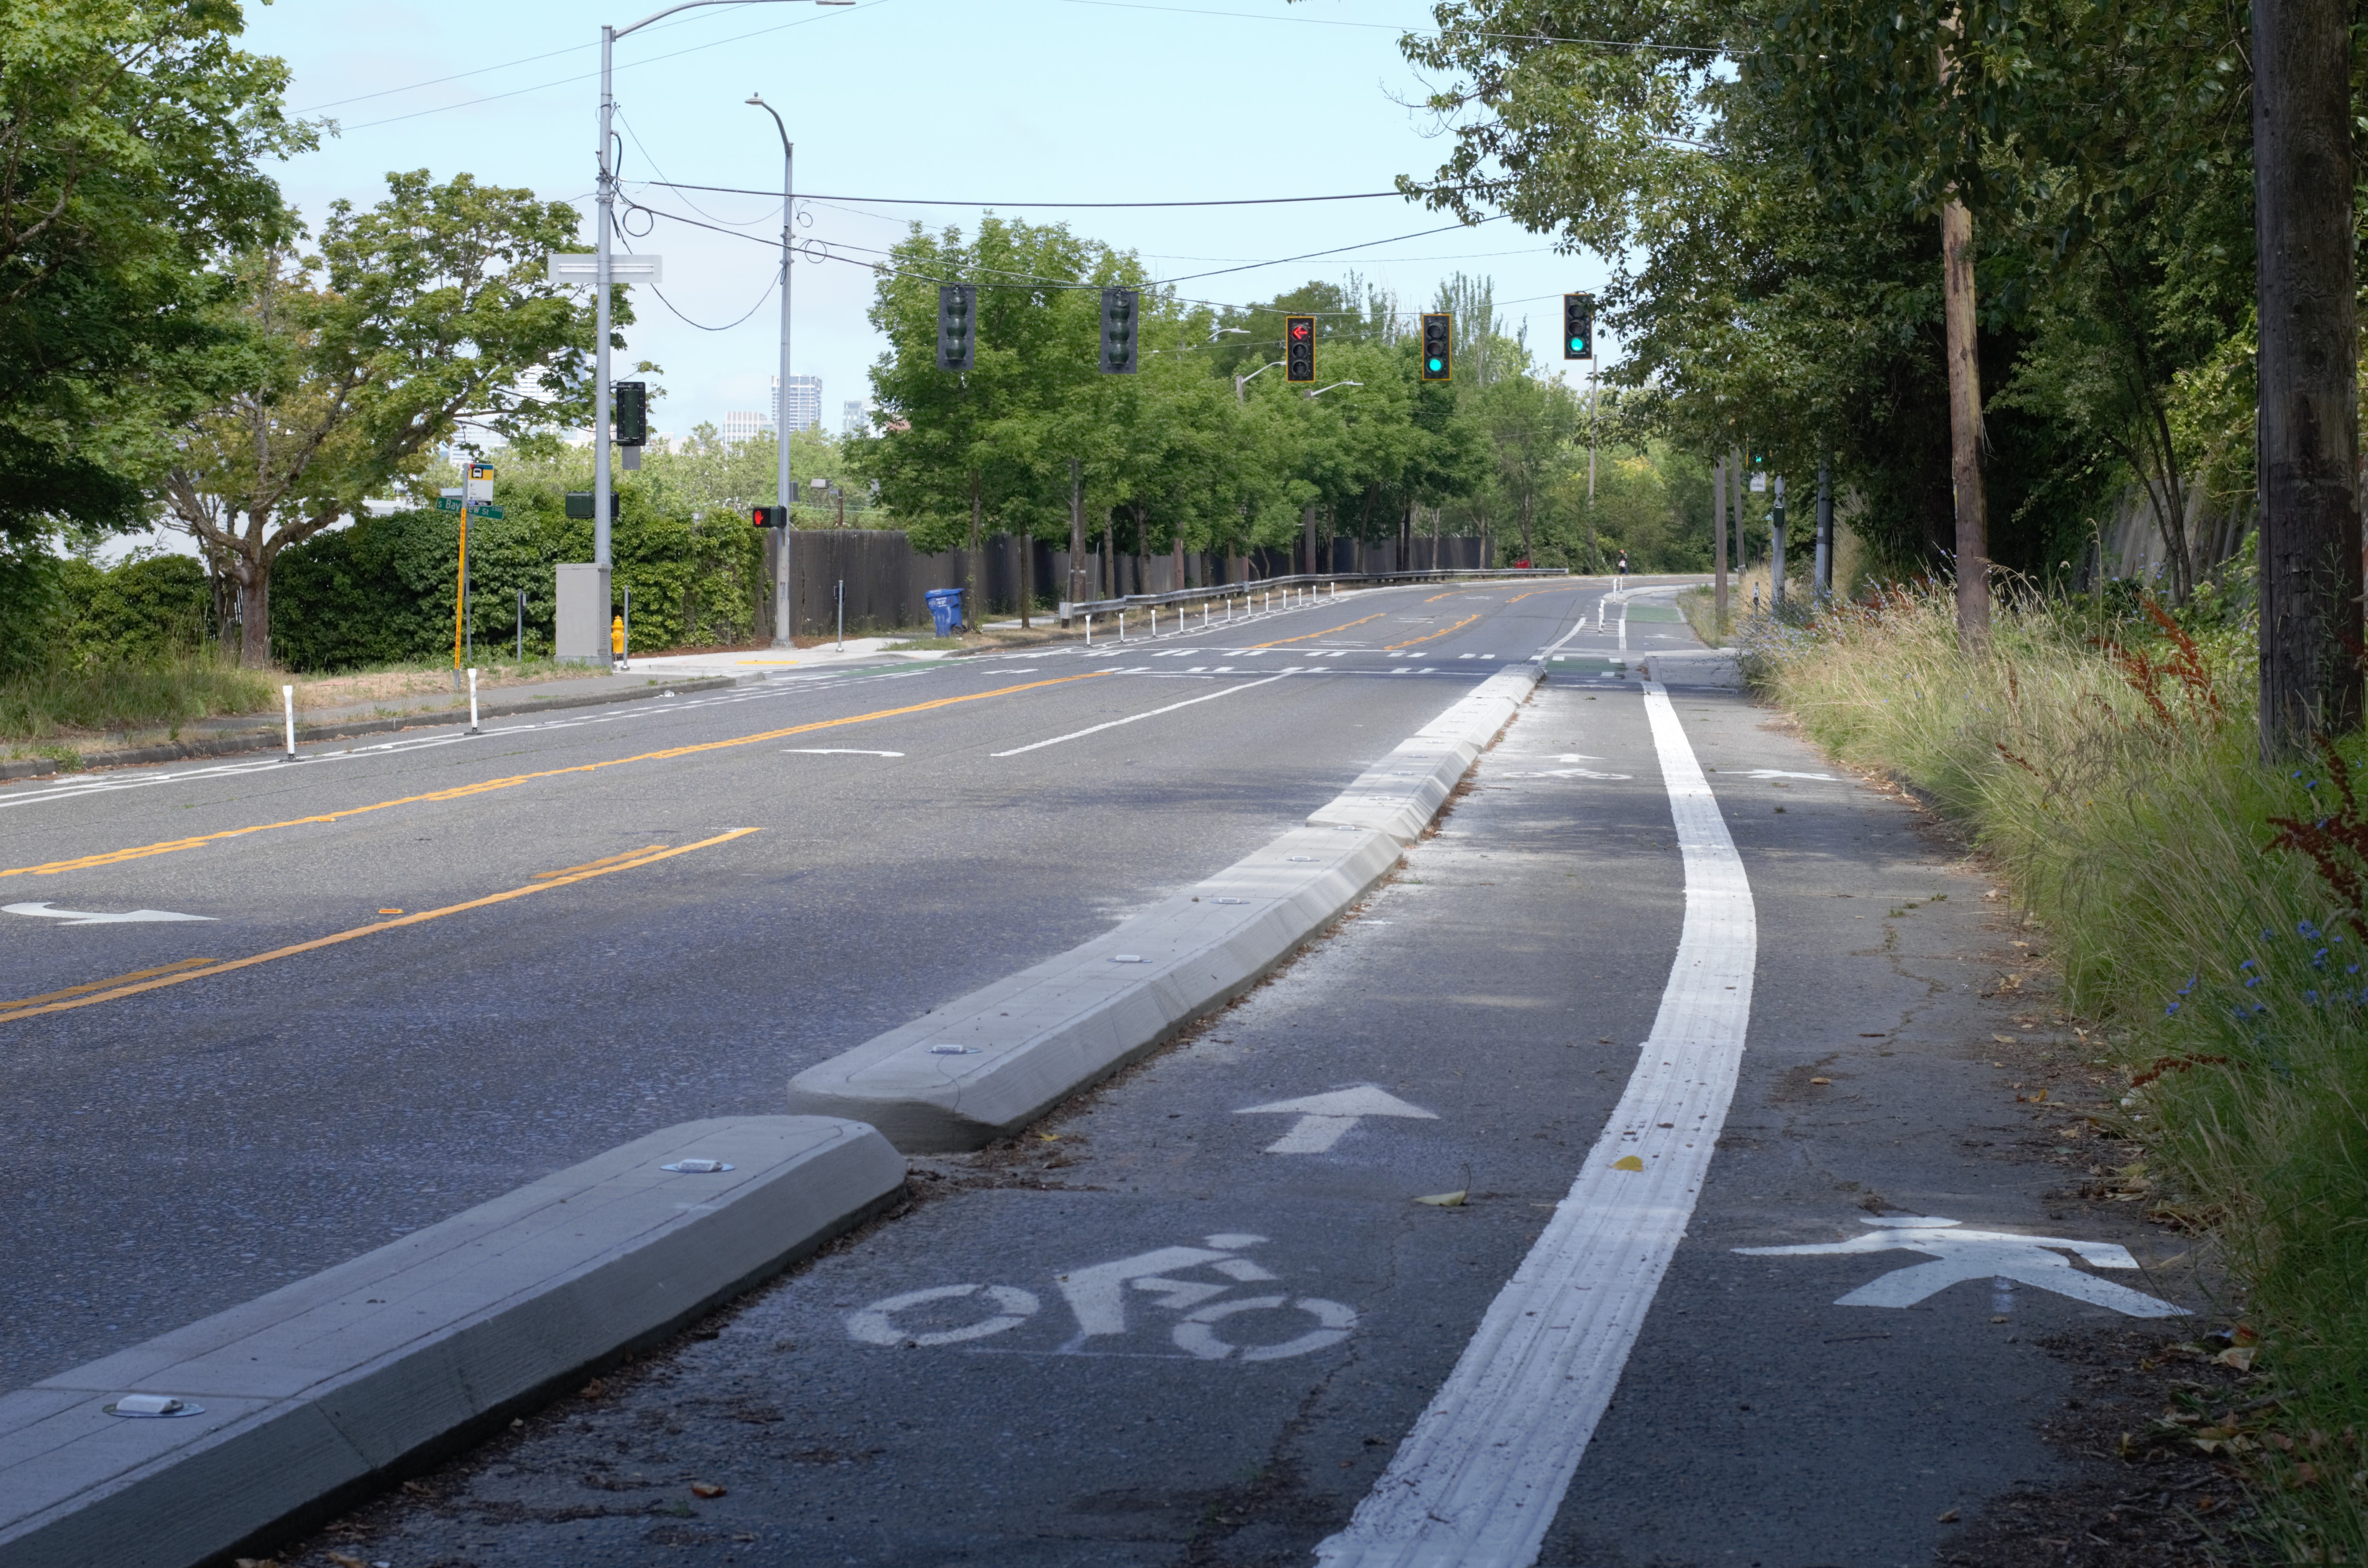 Shared path with raised pavement markings separating cyclists from pedestrians on the east side of MLK Jr Way S between S McClellan St and S Bayview St.